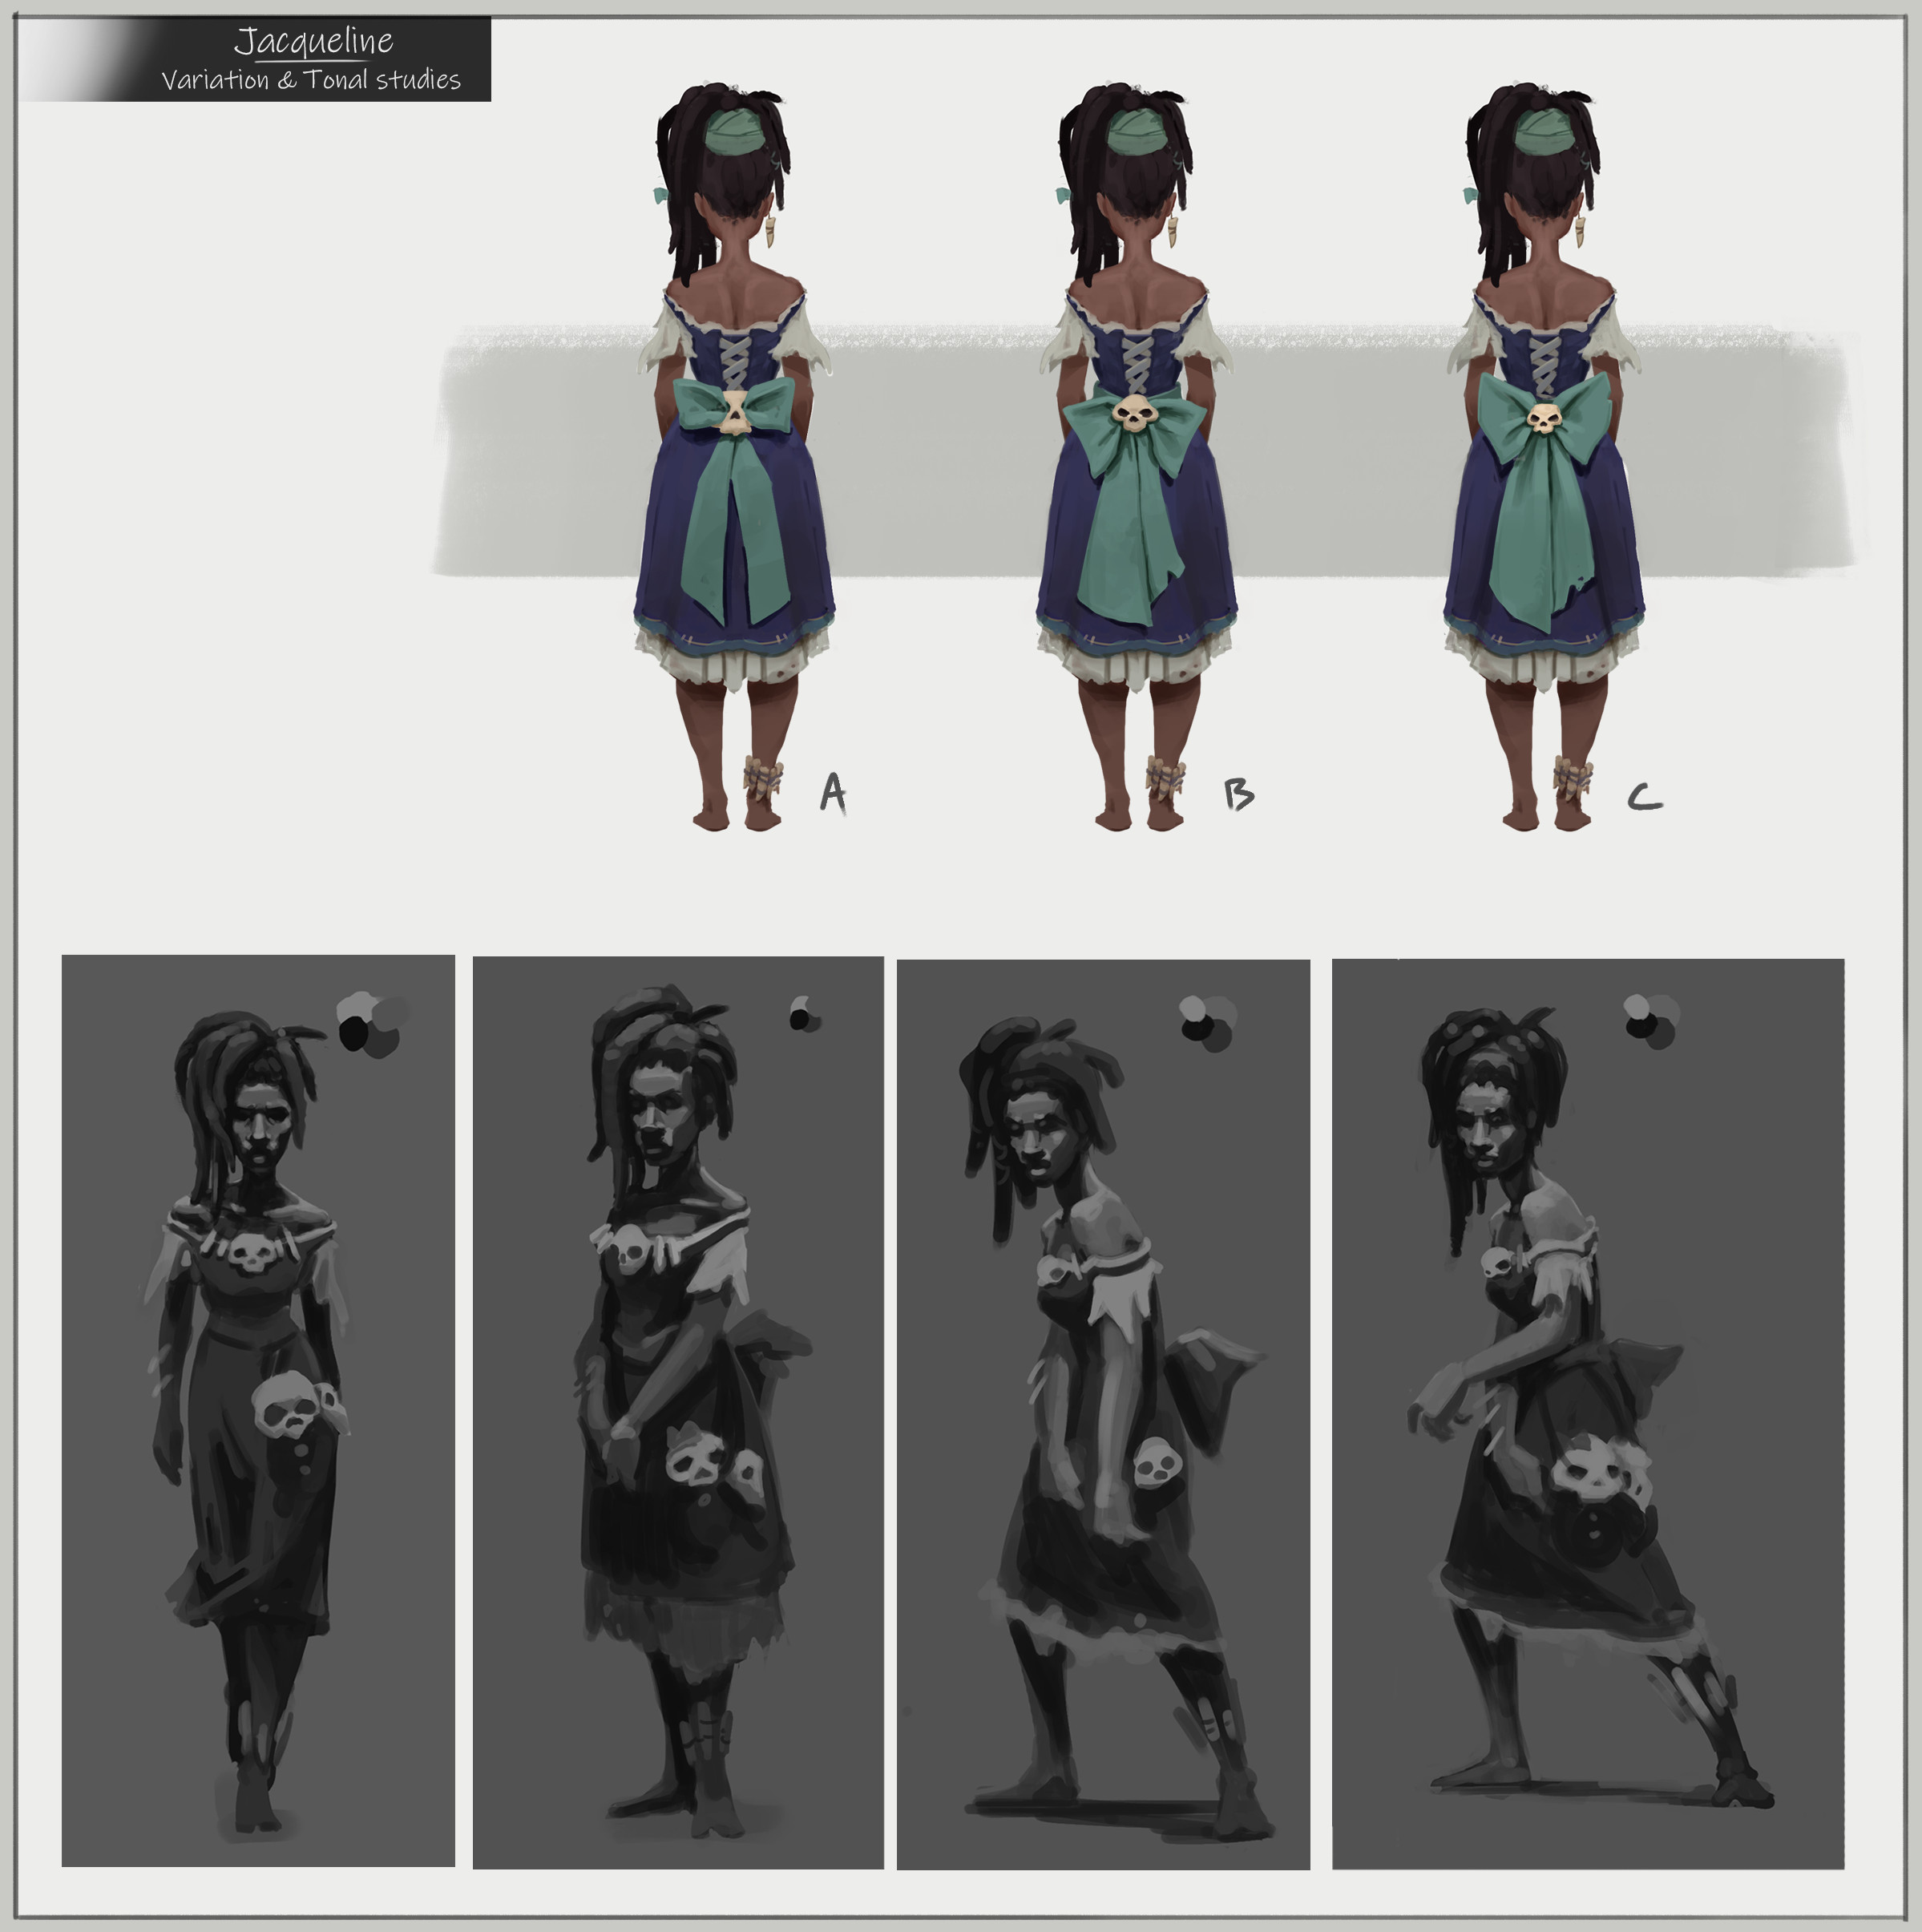 Back costume design options and tonal studies for the final mood painting.